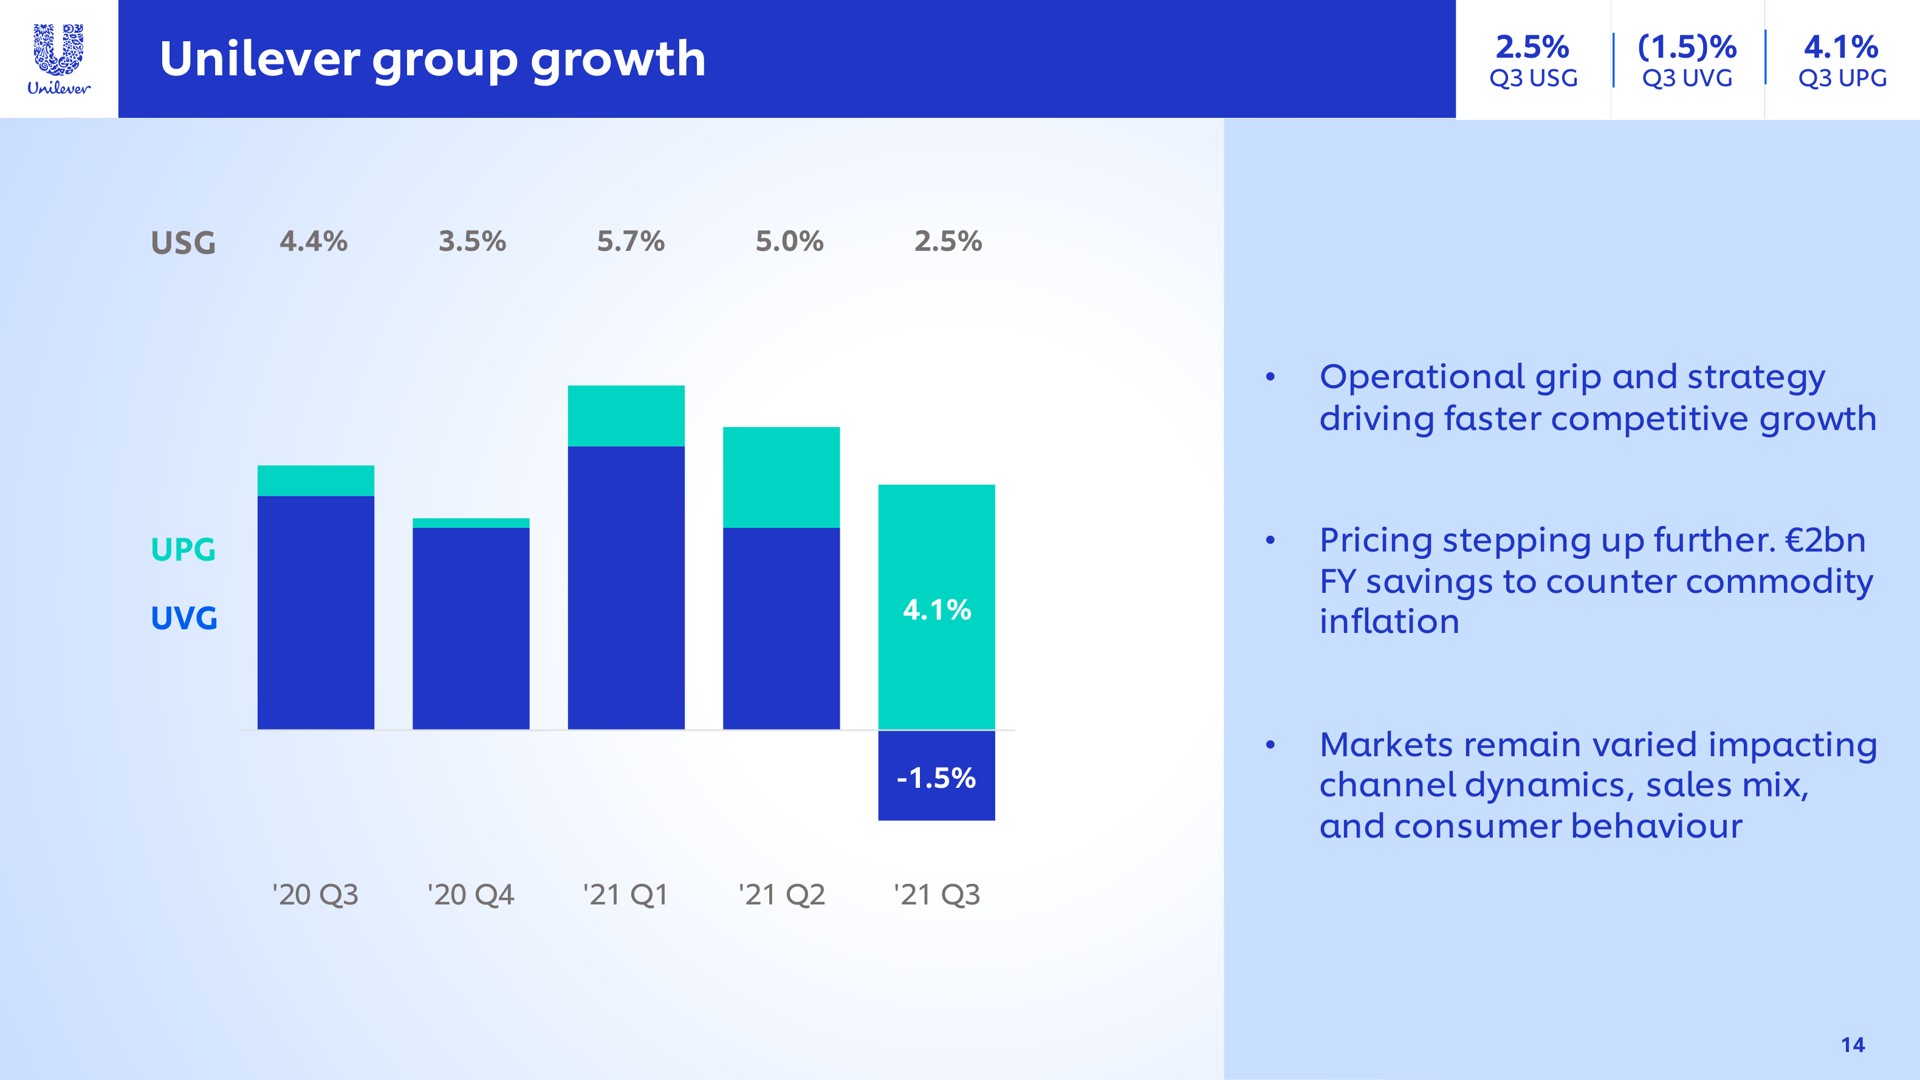 group growth operational grip and strategy driving faster competitive channel dynamics sales mix and consumer behaviour | Unilever